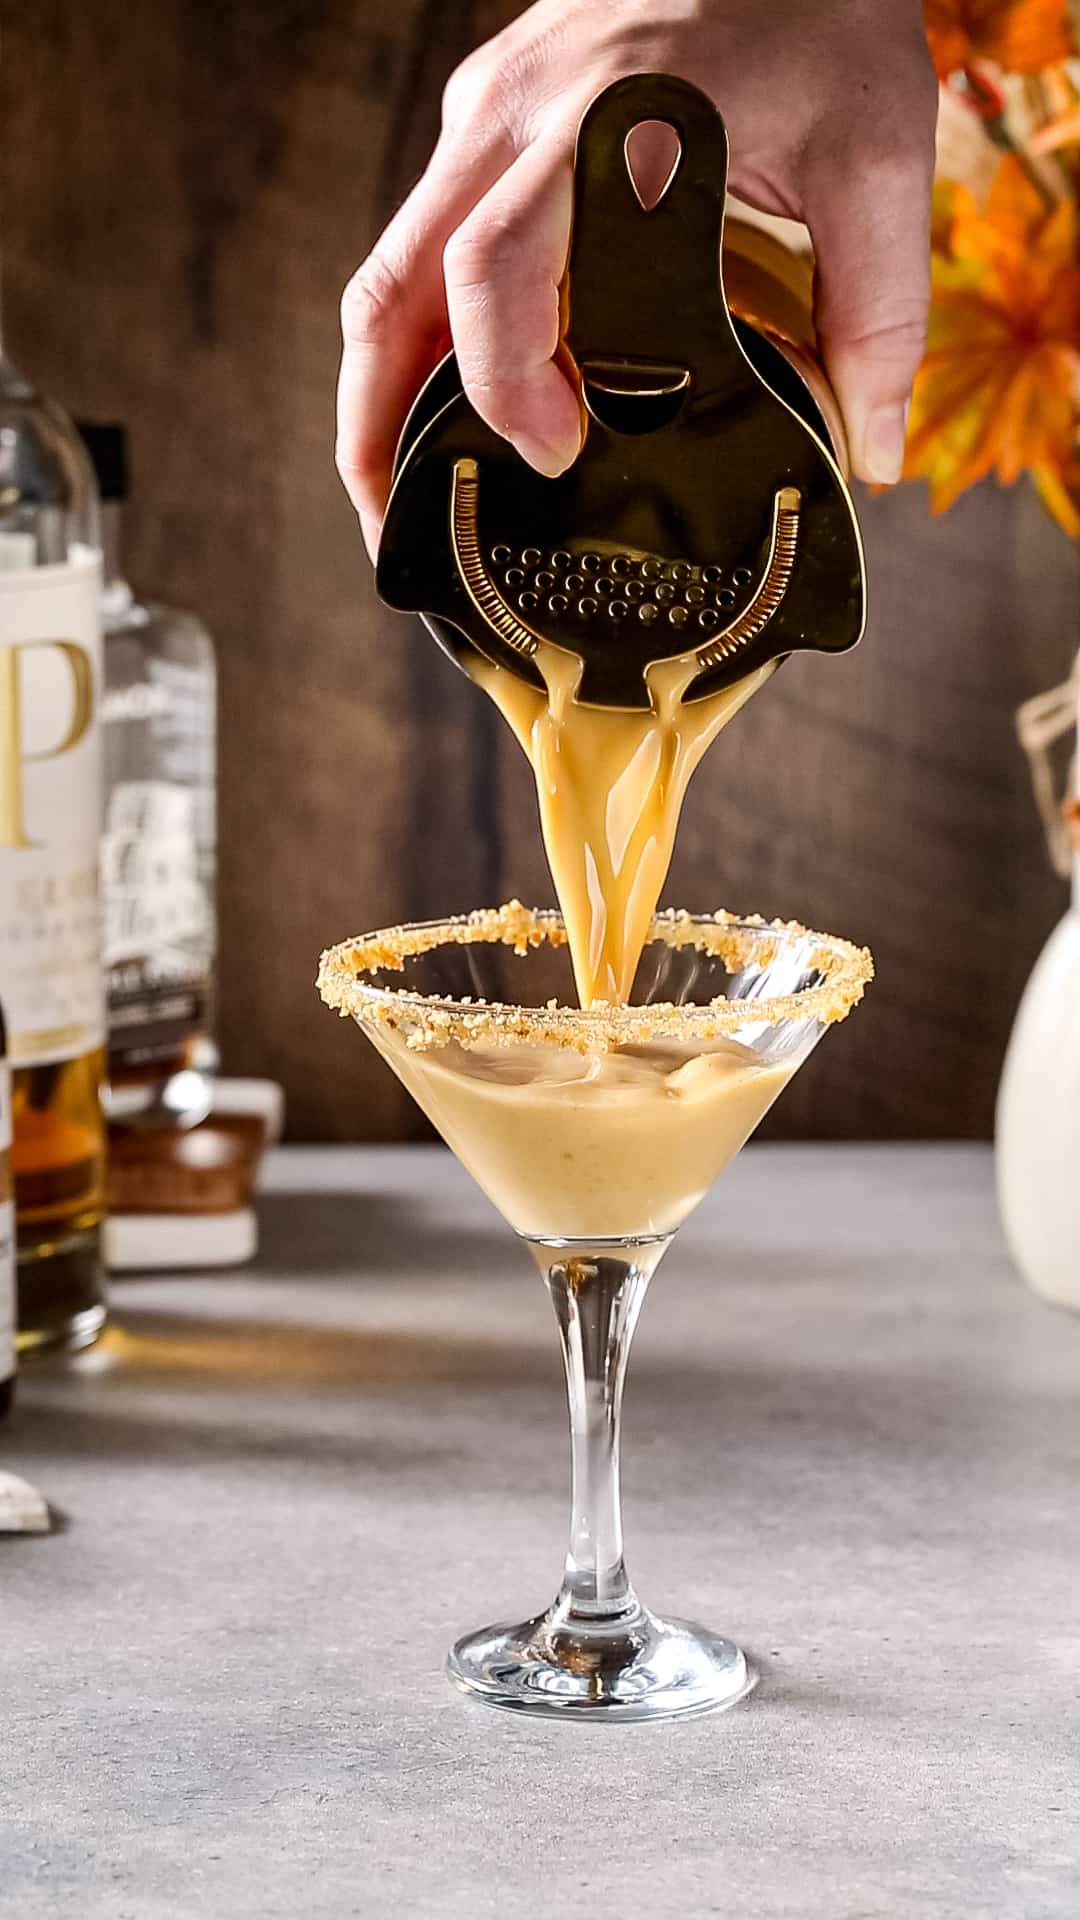 Hand using a cocktail strainer to pour brown liquid into a martini glass that has a cookie crumb coated rim.